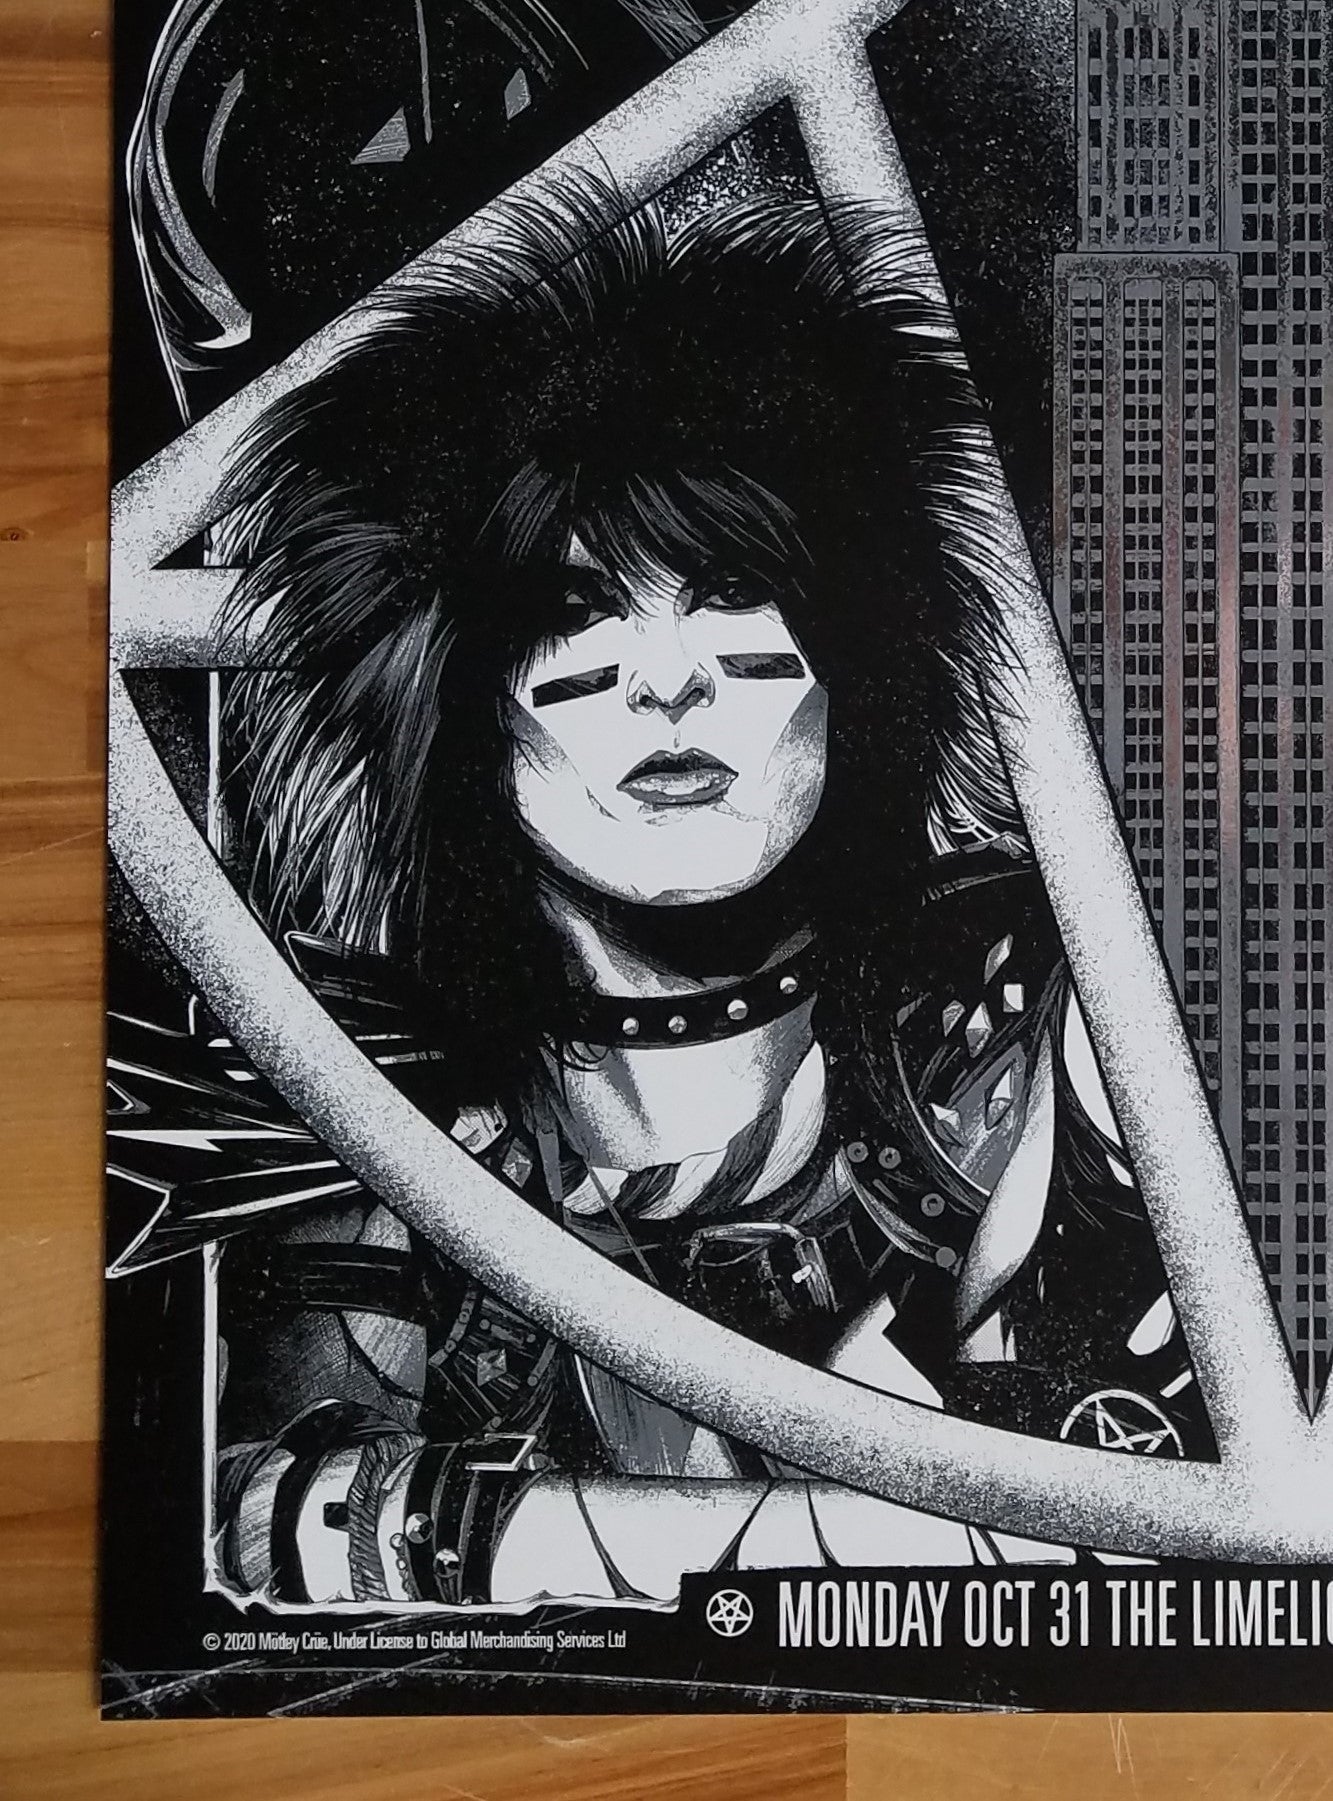 MÖTLEY CRÜE NEW YORK CITY 1983 BY WILDNER LIMA (FOIL VARIANT EDITION) Poster